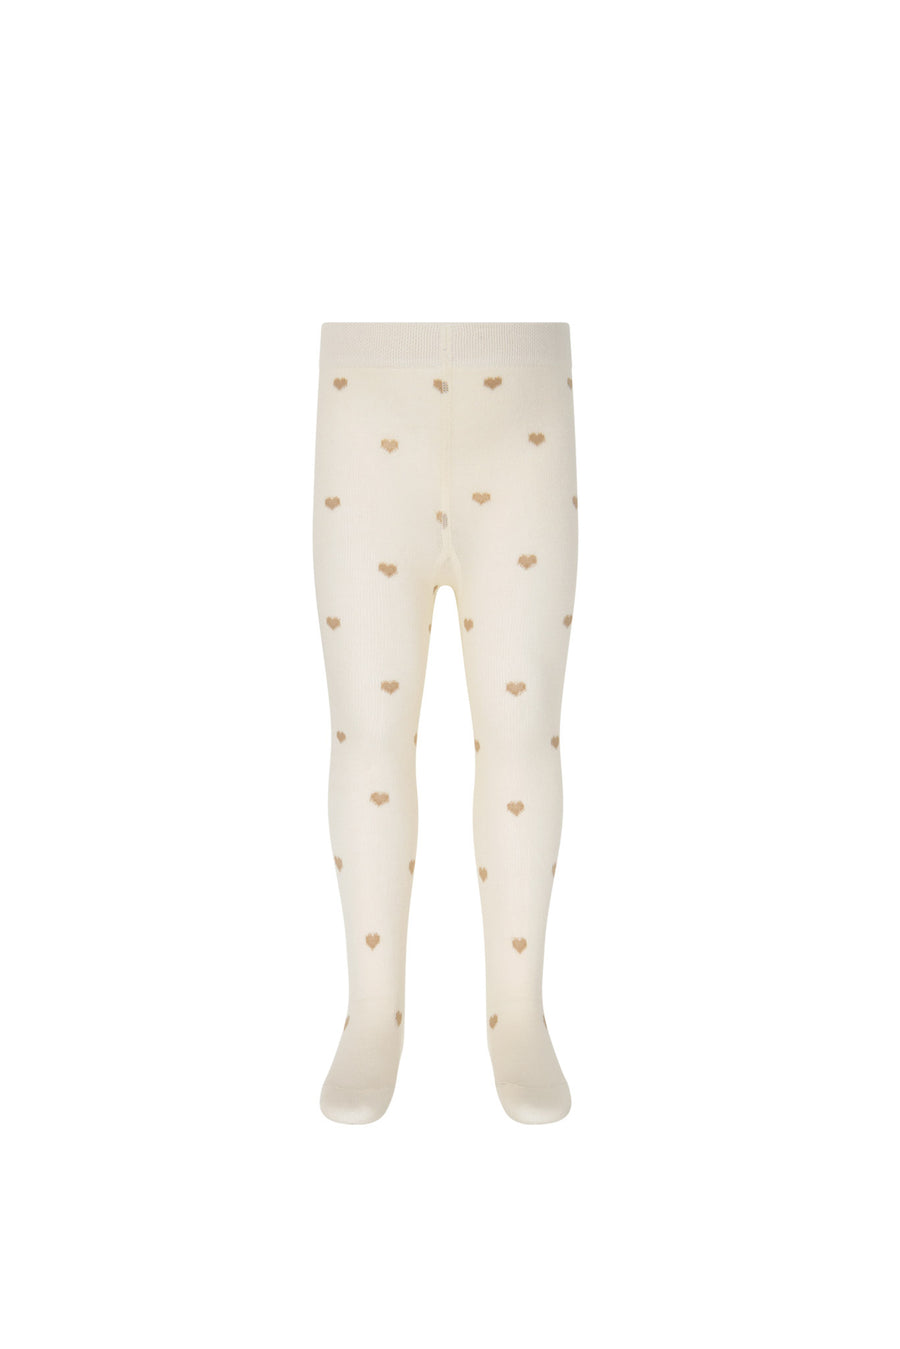 Jacquard Heart Tight - Mon Amour Oatmeal Marle Childrens Tight from Jamie Kay NZ